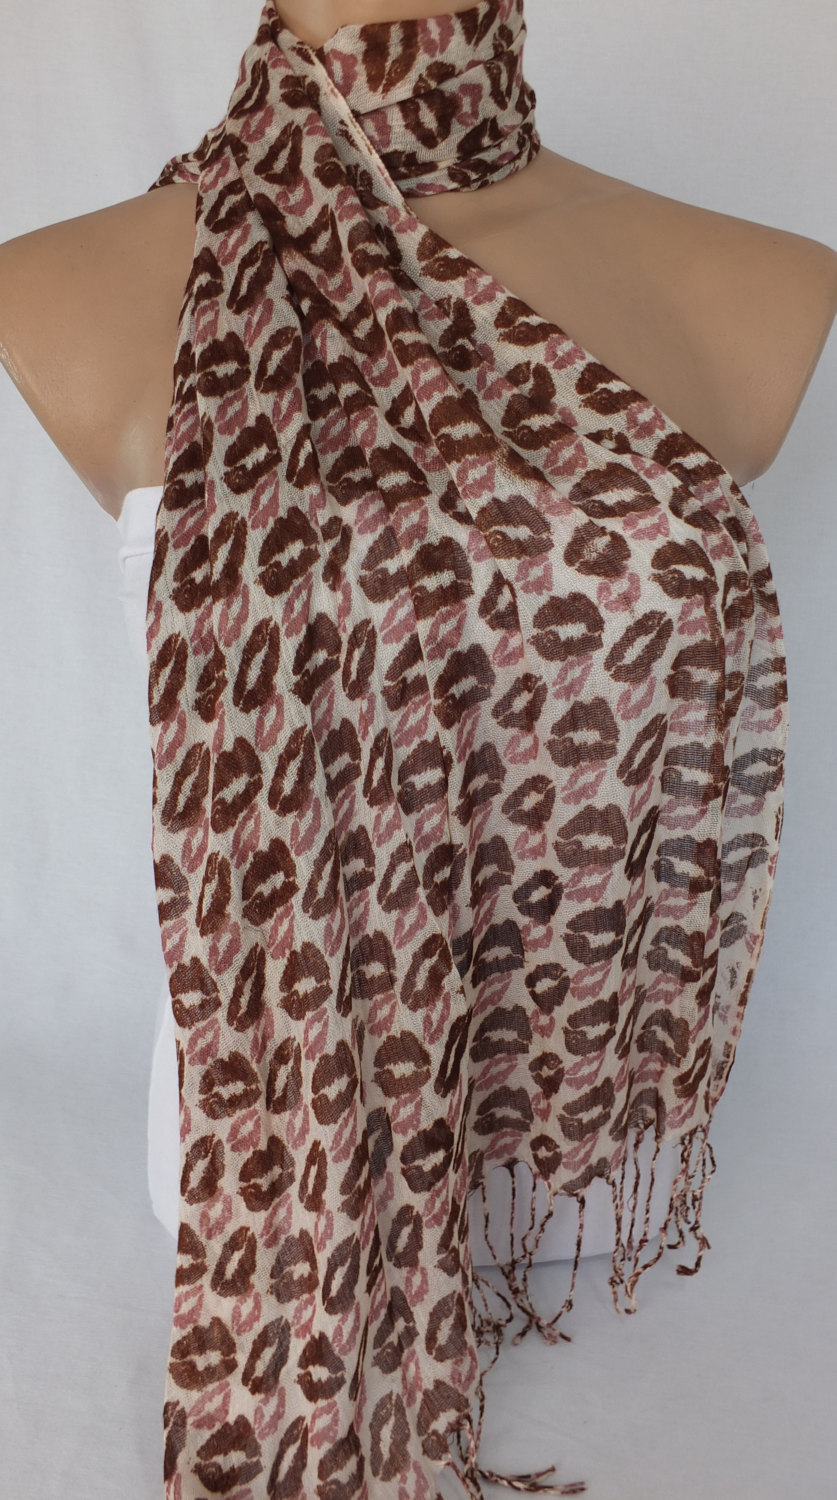 Brown Scarf, Lips Printed Scarf, Woman Fashion Scarf, Colorful Scarf, Fabric Shawl, Gift For Her